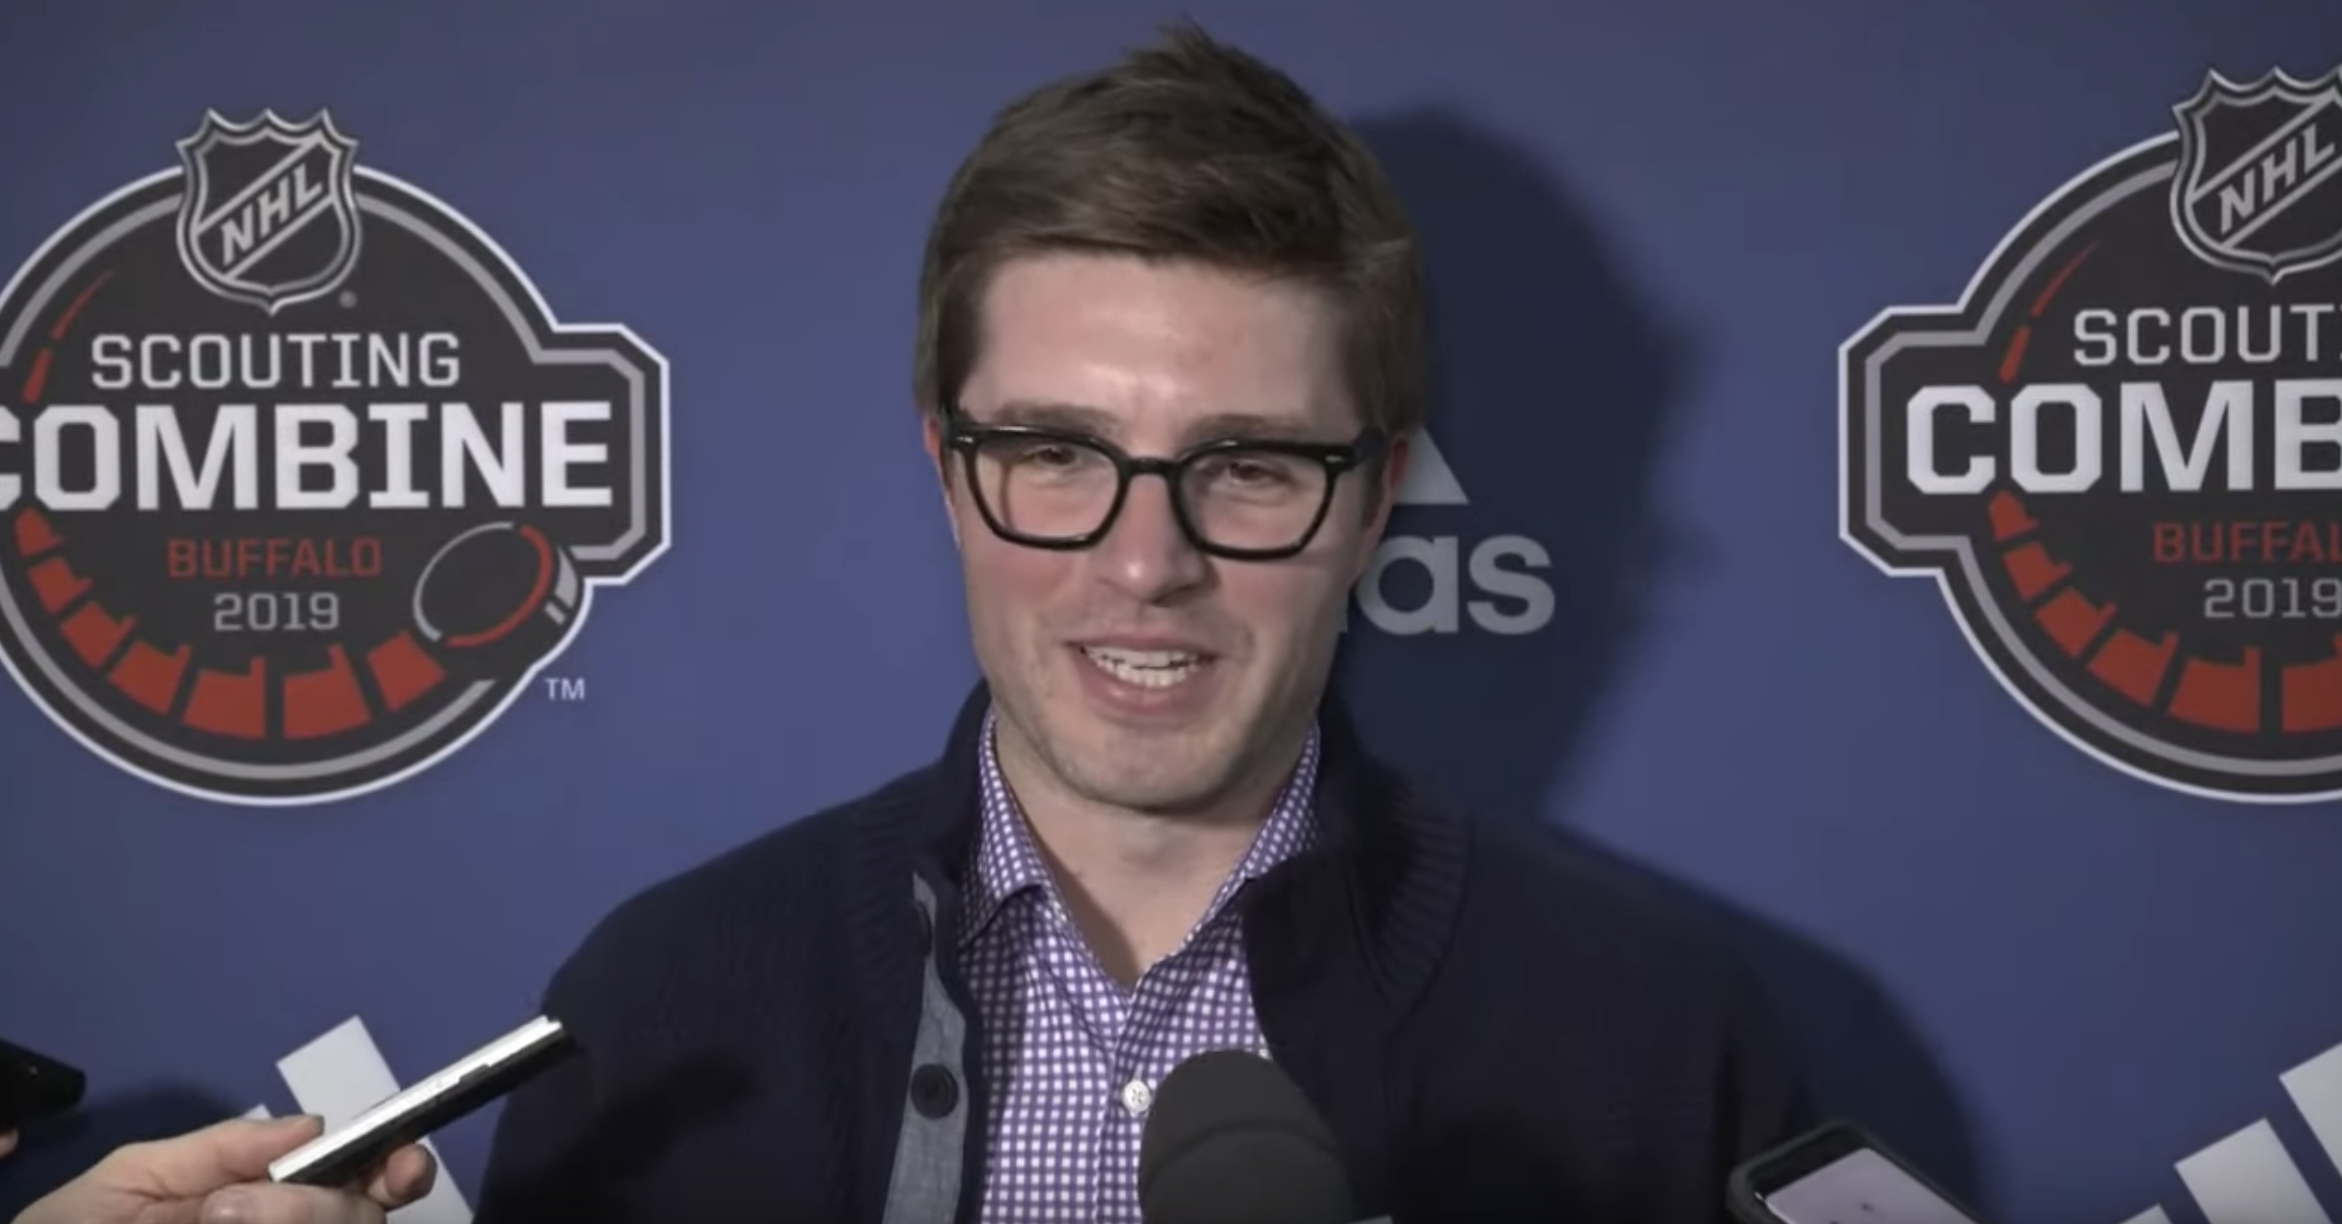 Toronto Maple Leafs GM Kyle Dubas at the 2019 Scouting Combine